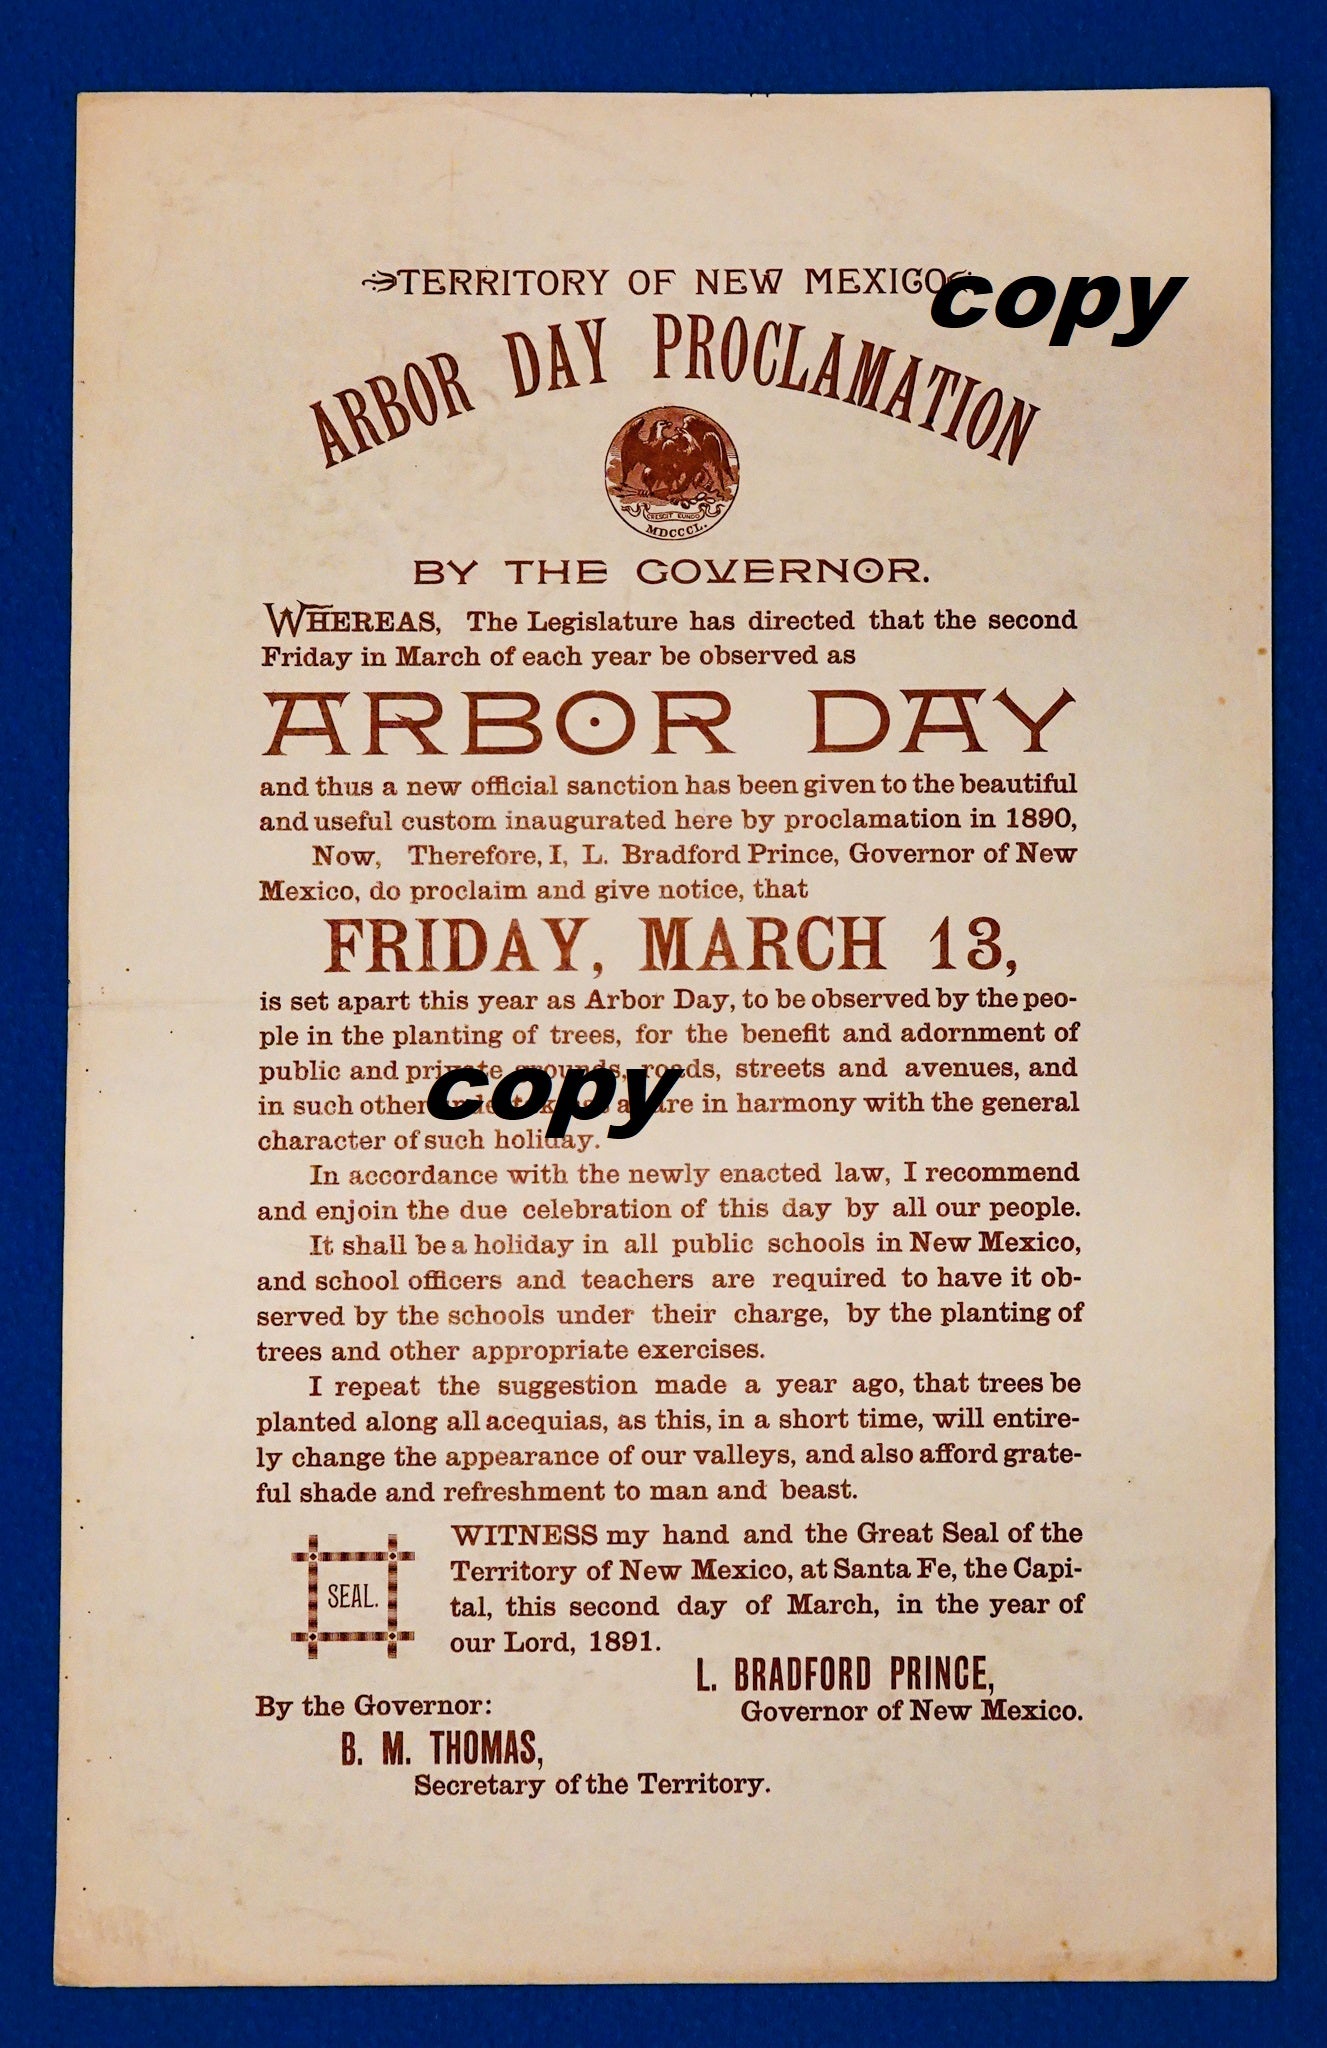 ARBOR DAY IN NEW MEXICO 1891